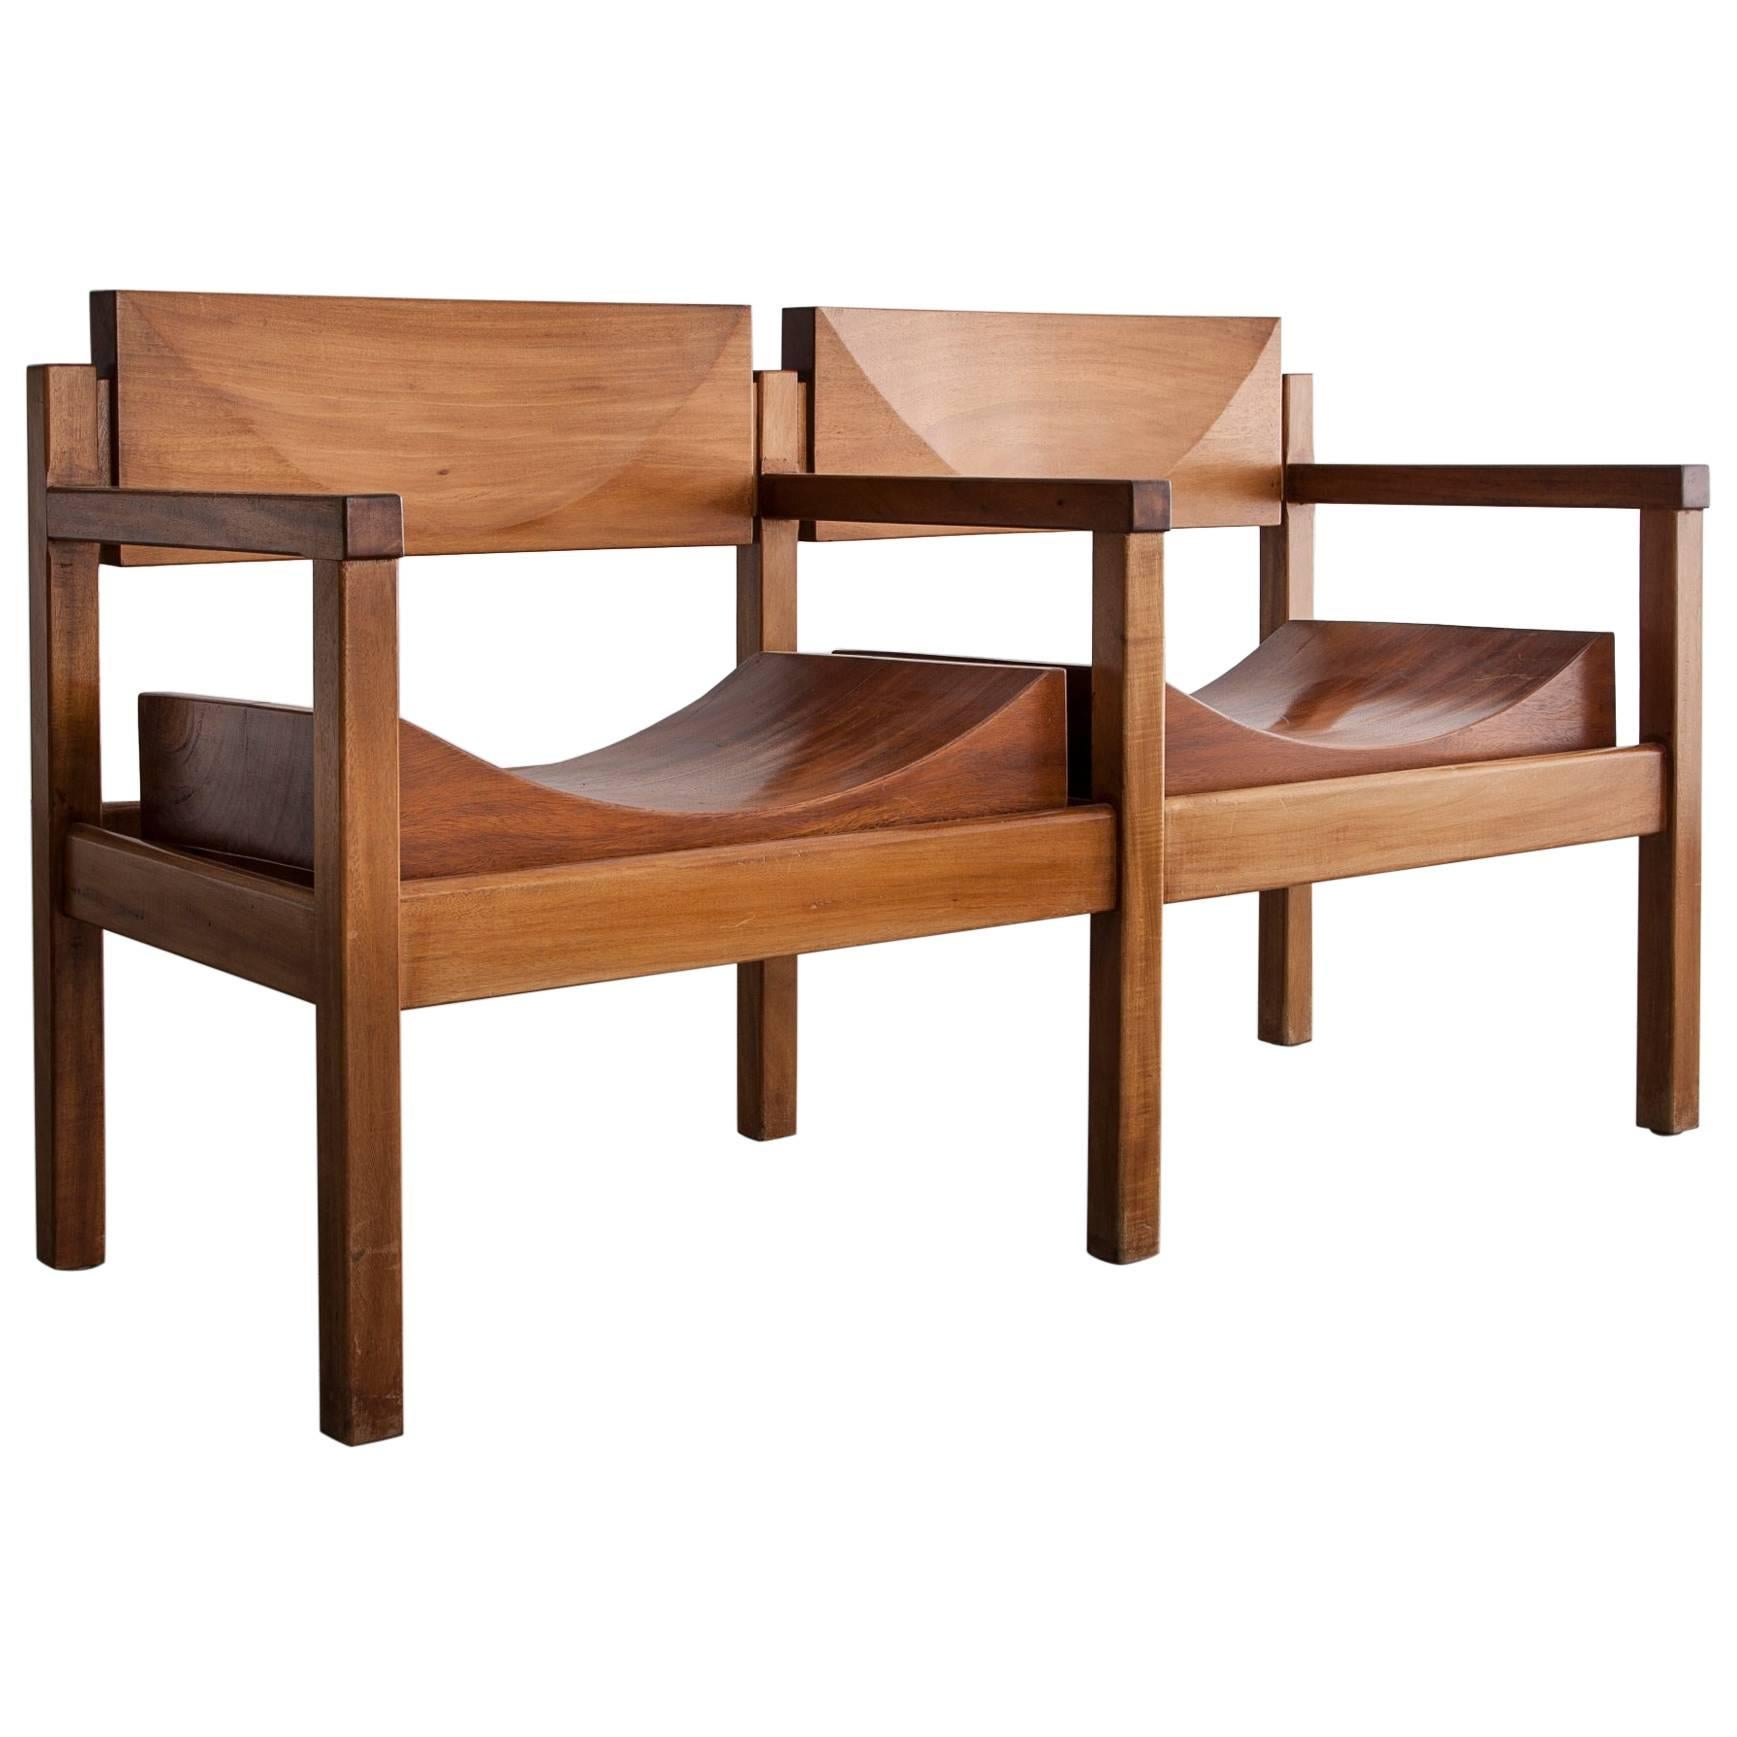 Two-Seat "Tree Trunk Bench" in Solid, Shaped Rosewood